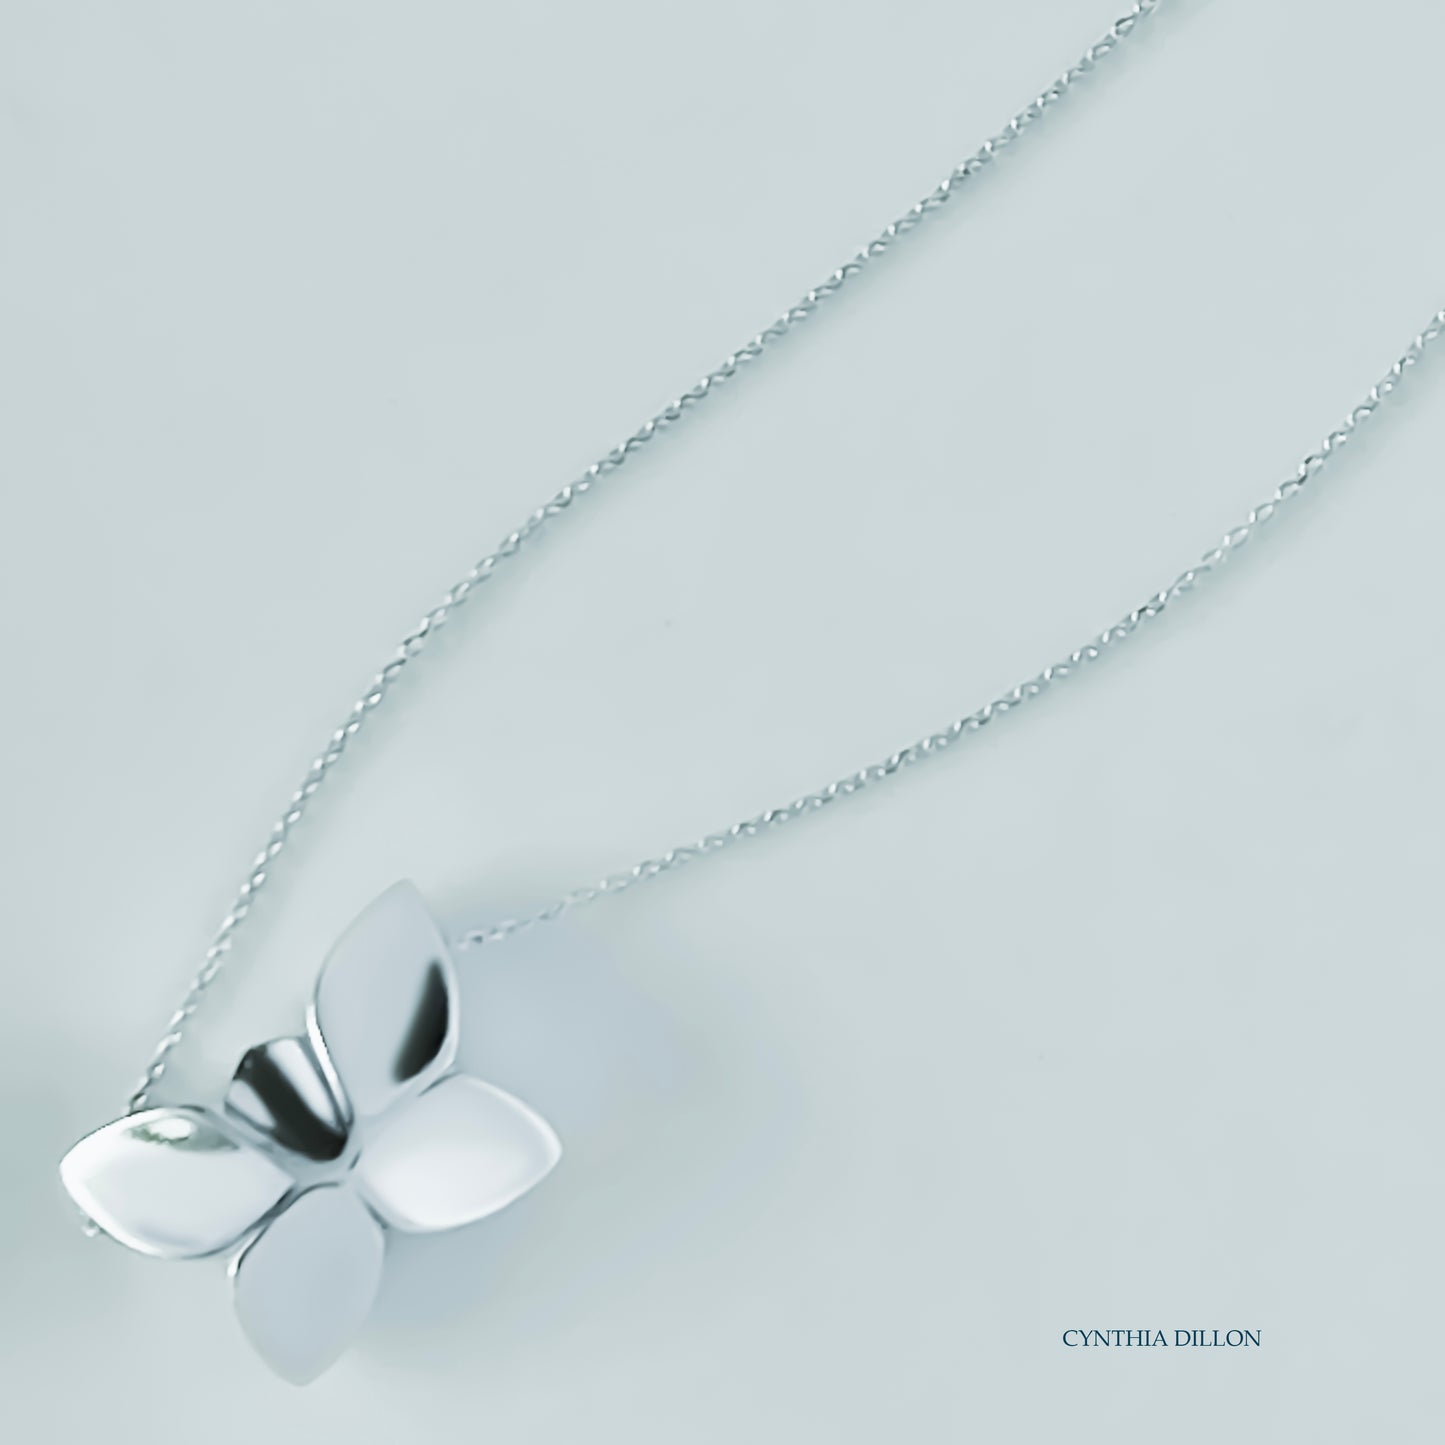 Pendant - Sculpted "Butterfly" in S/S w. 16" Chain.